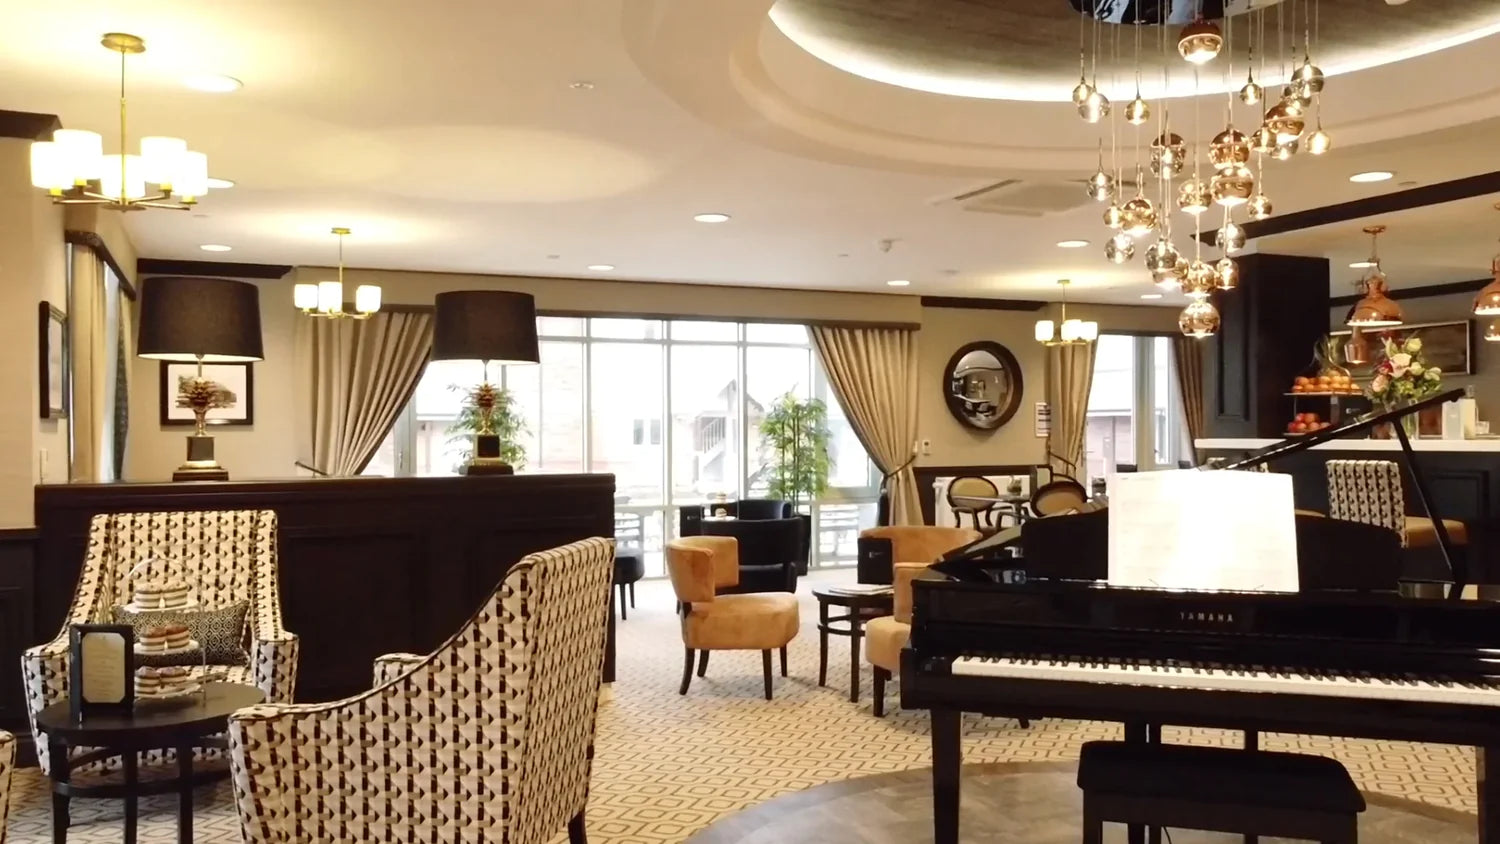 Interior view of a stylish new nursing home lounge with chairs and a piano.